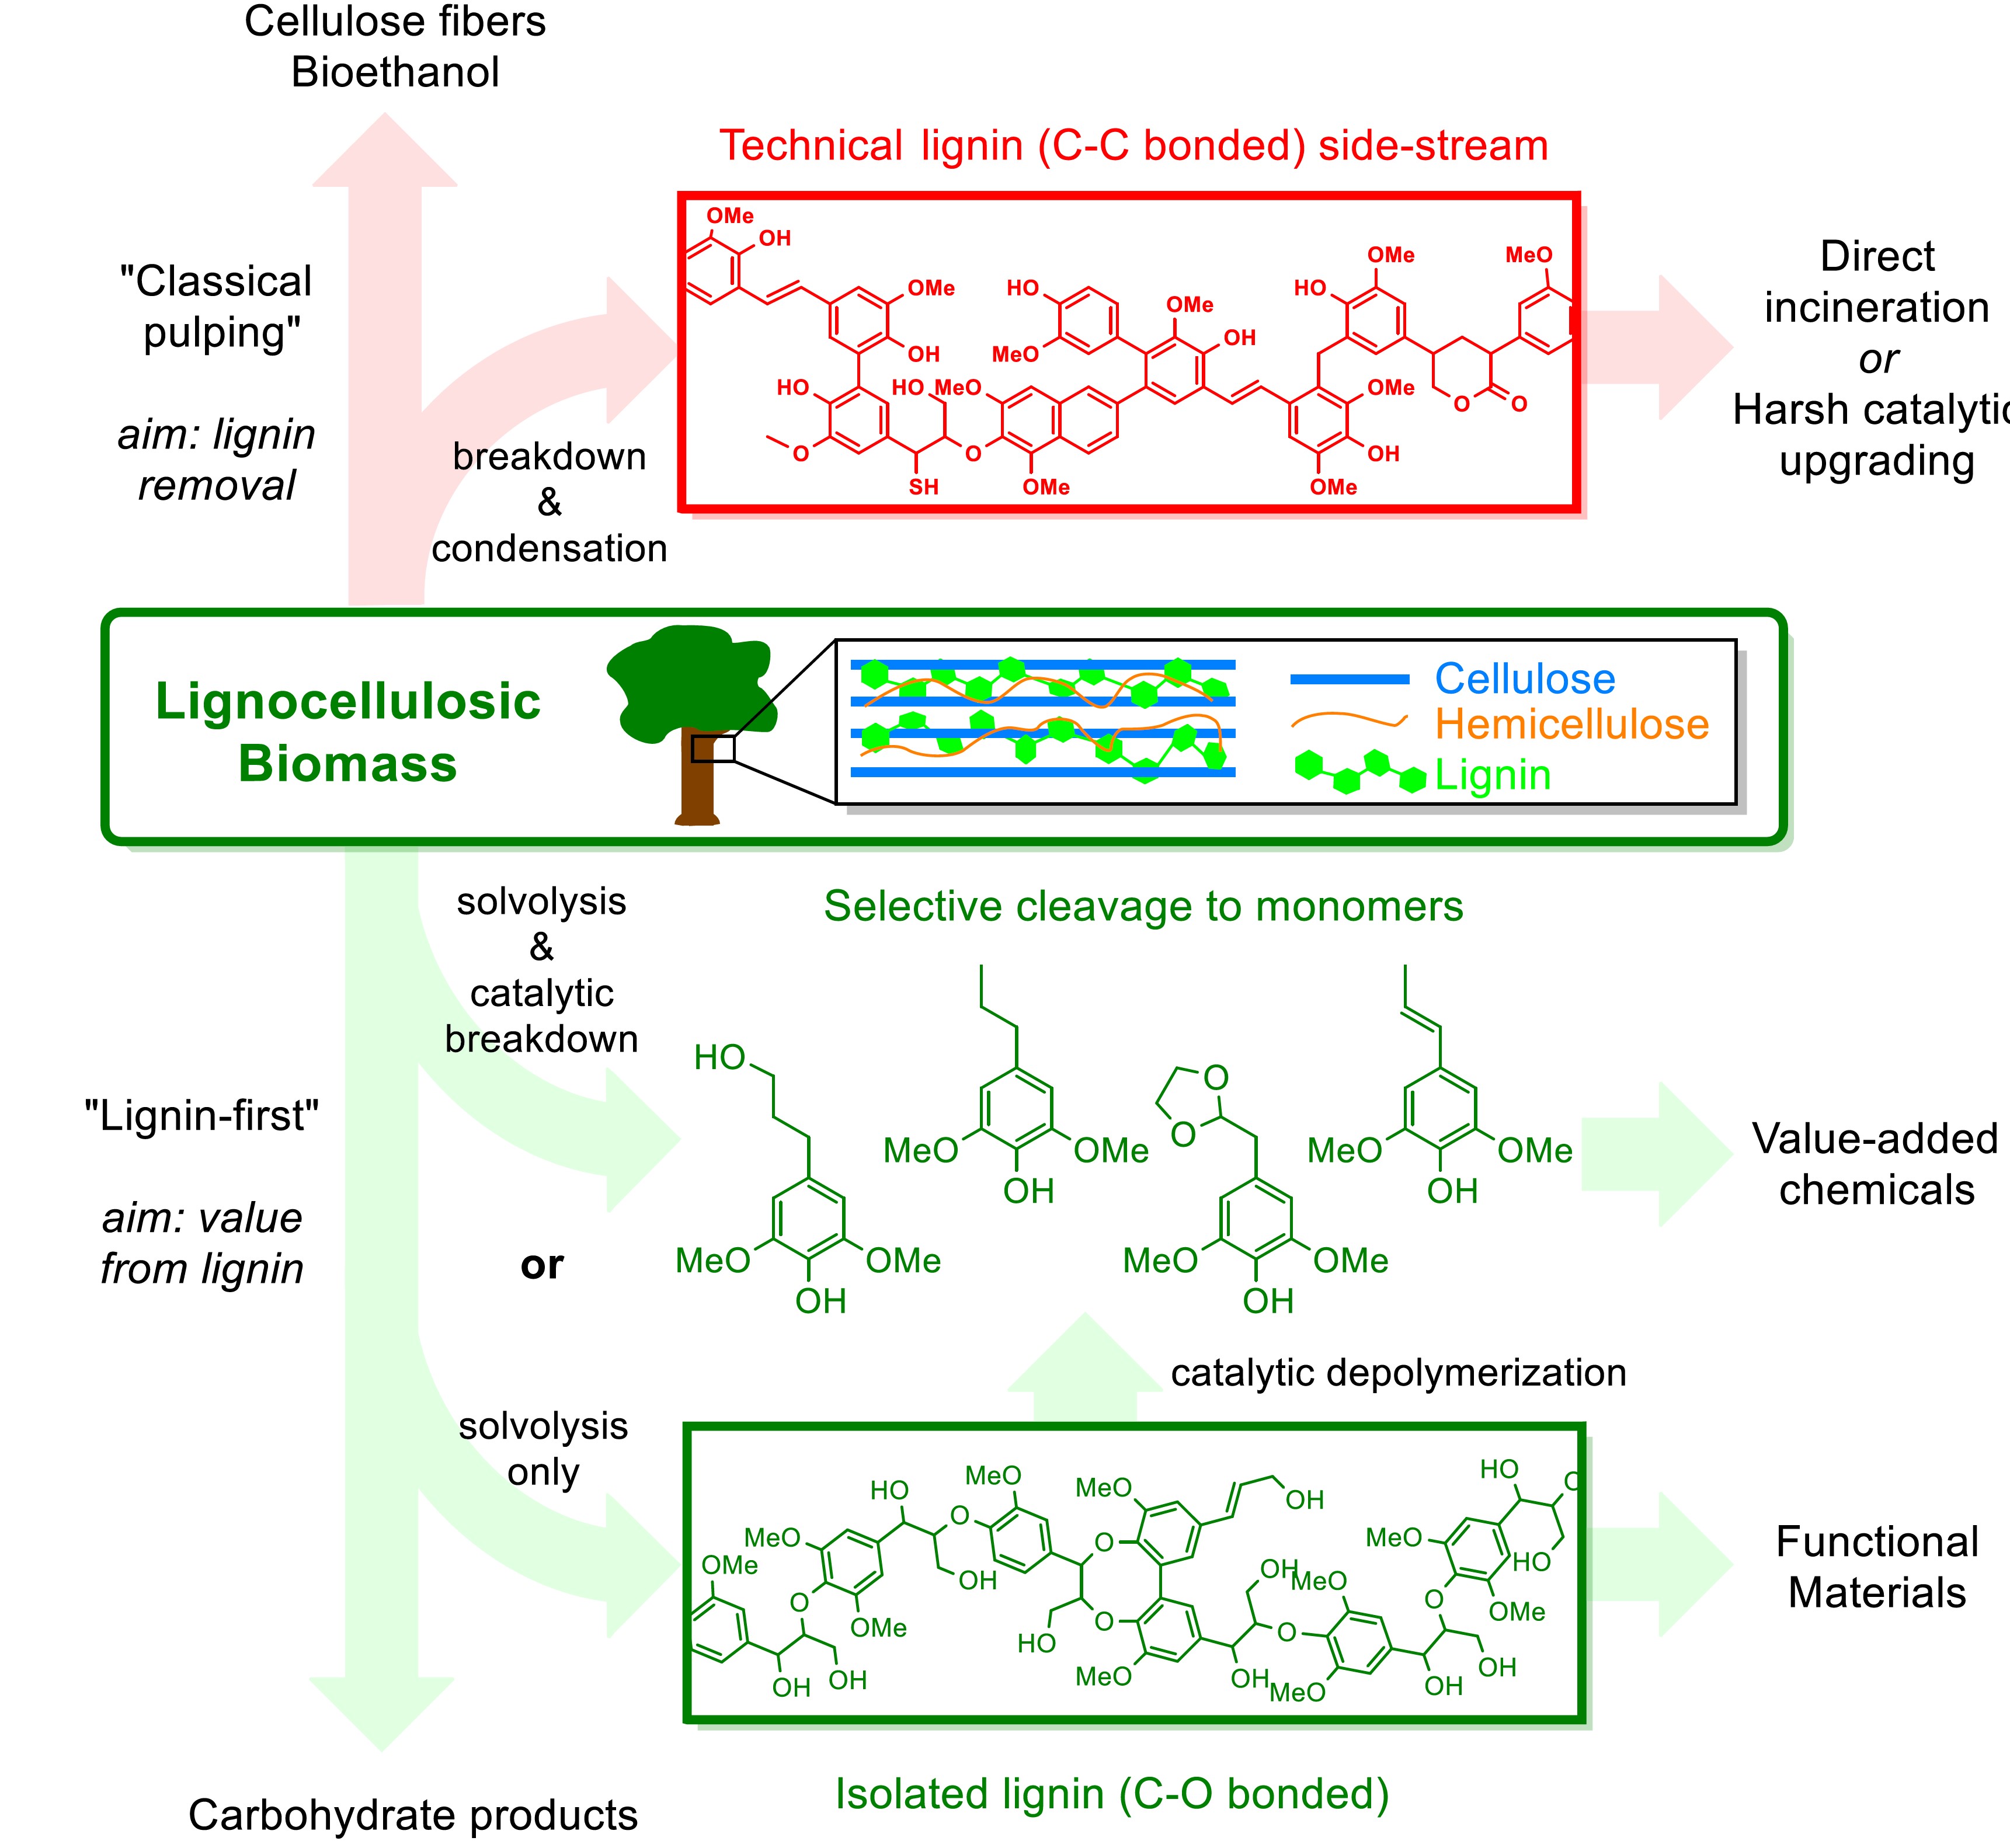 Reprinted from Chem Catal (https://www.sciencedirect.com/journal/chem-catalysis) , 1, P.J.Deuss & C. Kugge, “Lignin-first” catalytic valorization for generating higher value from lignin, 6-11 , Copyright (2021), with permission from Elsevier.